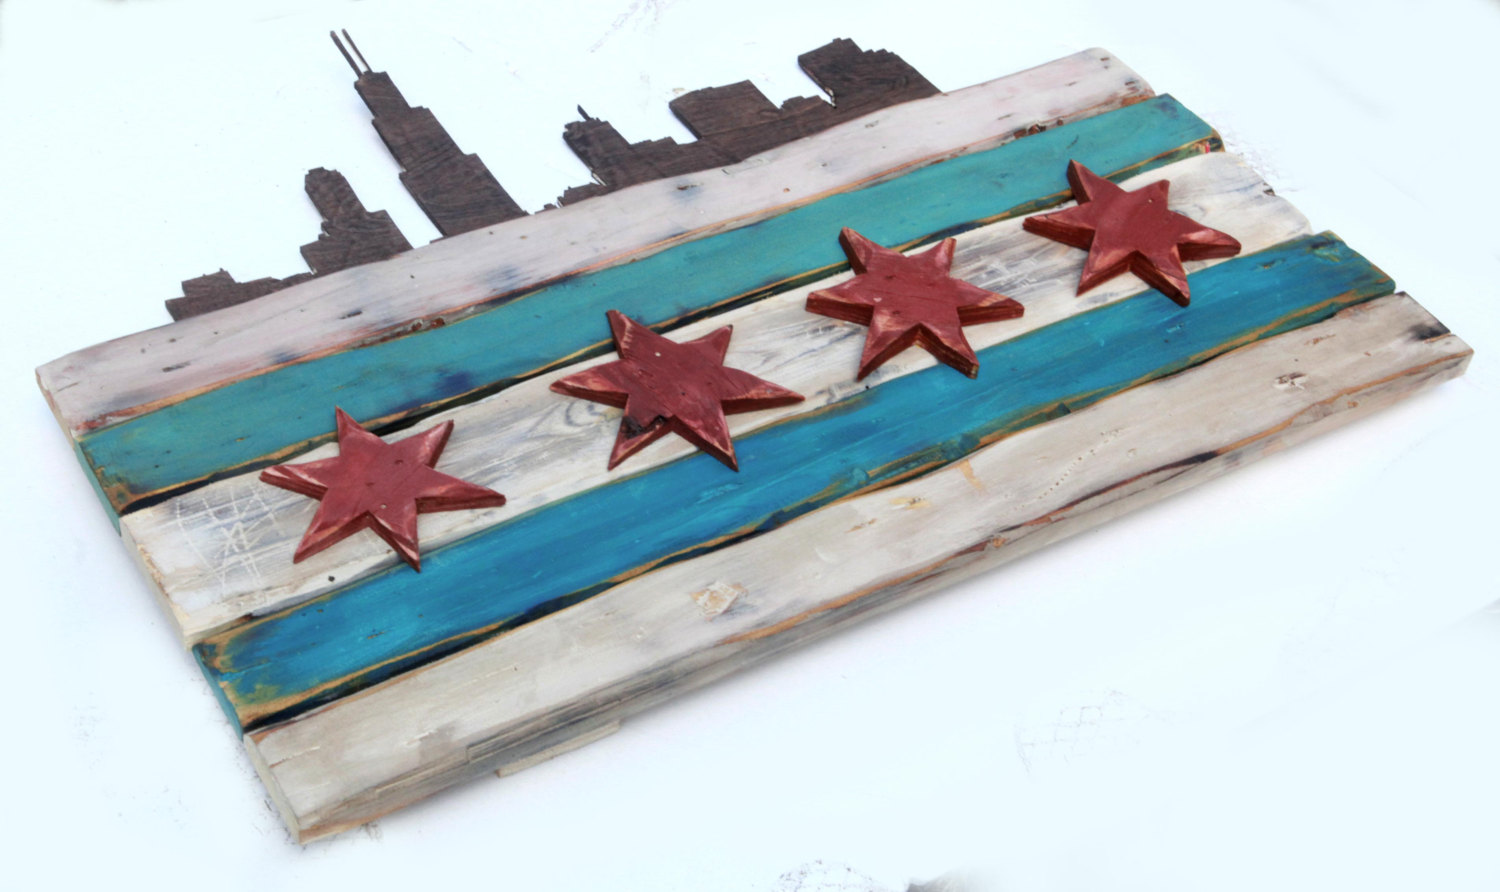 Chicago Flag Distressed Weathered Wood One of a kind with skyline, Blue, red, Illinois,recycled, reclaimed, wooden, rustic